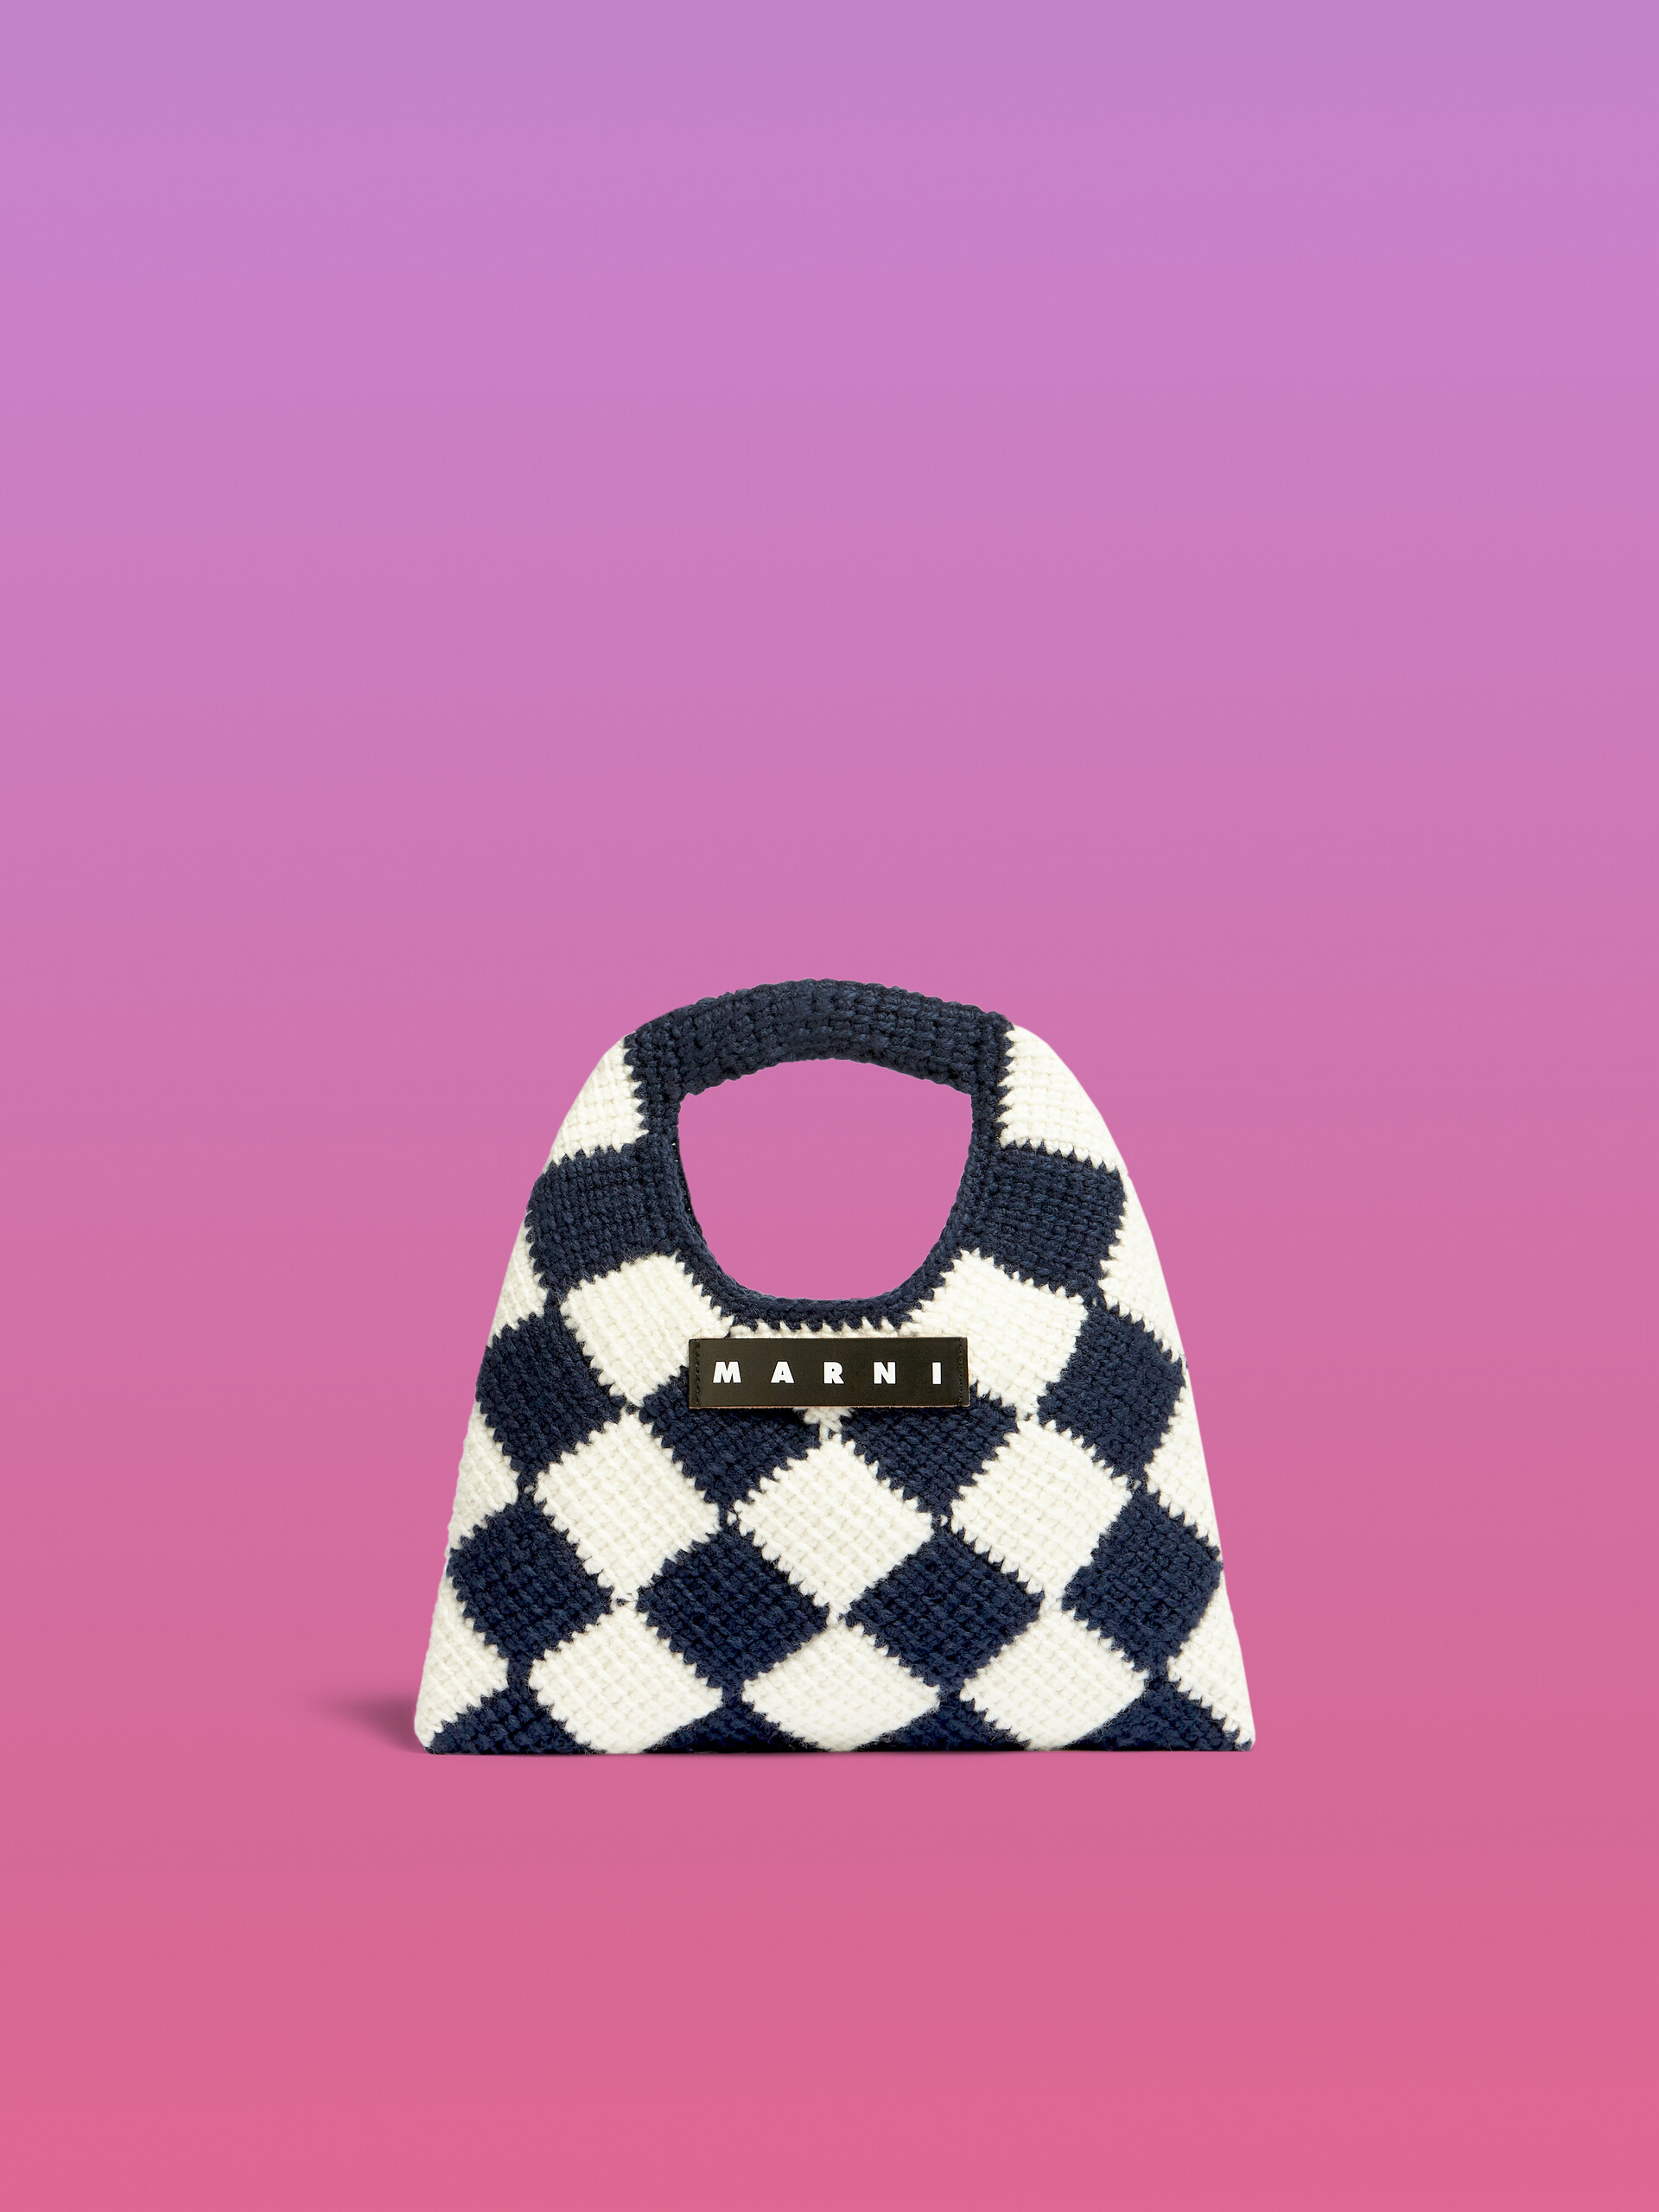 MARNI MARKET DIAMOND small bag in white and blue tech wool - Bags - Image 1